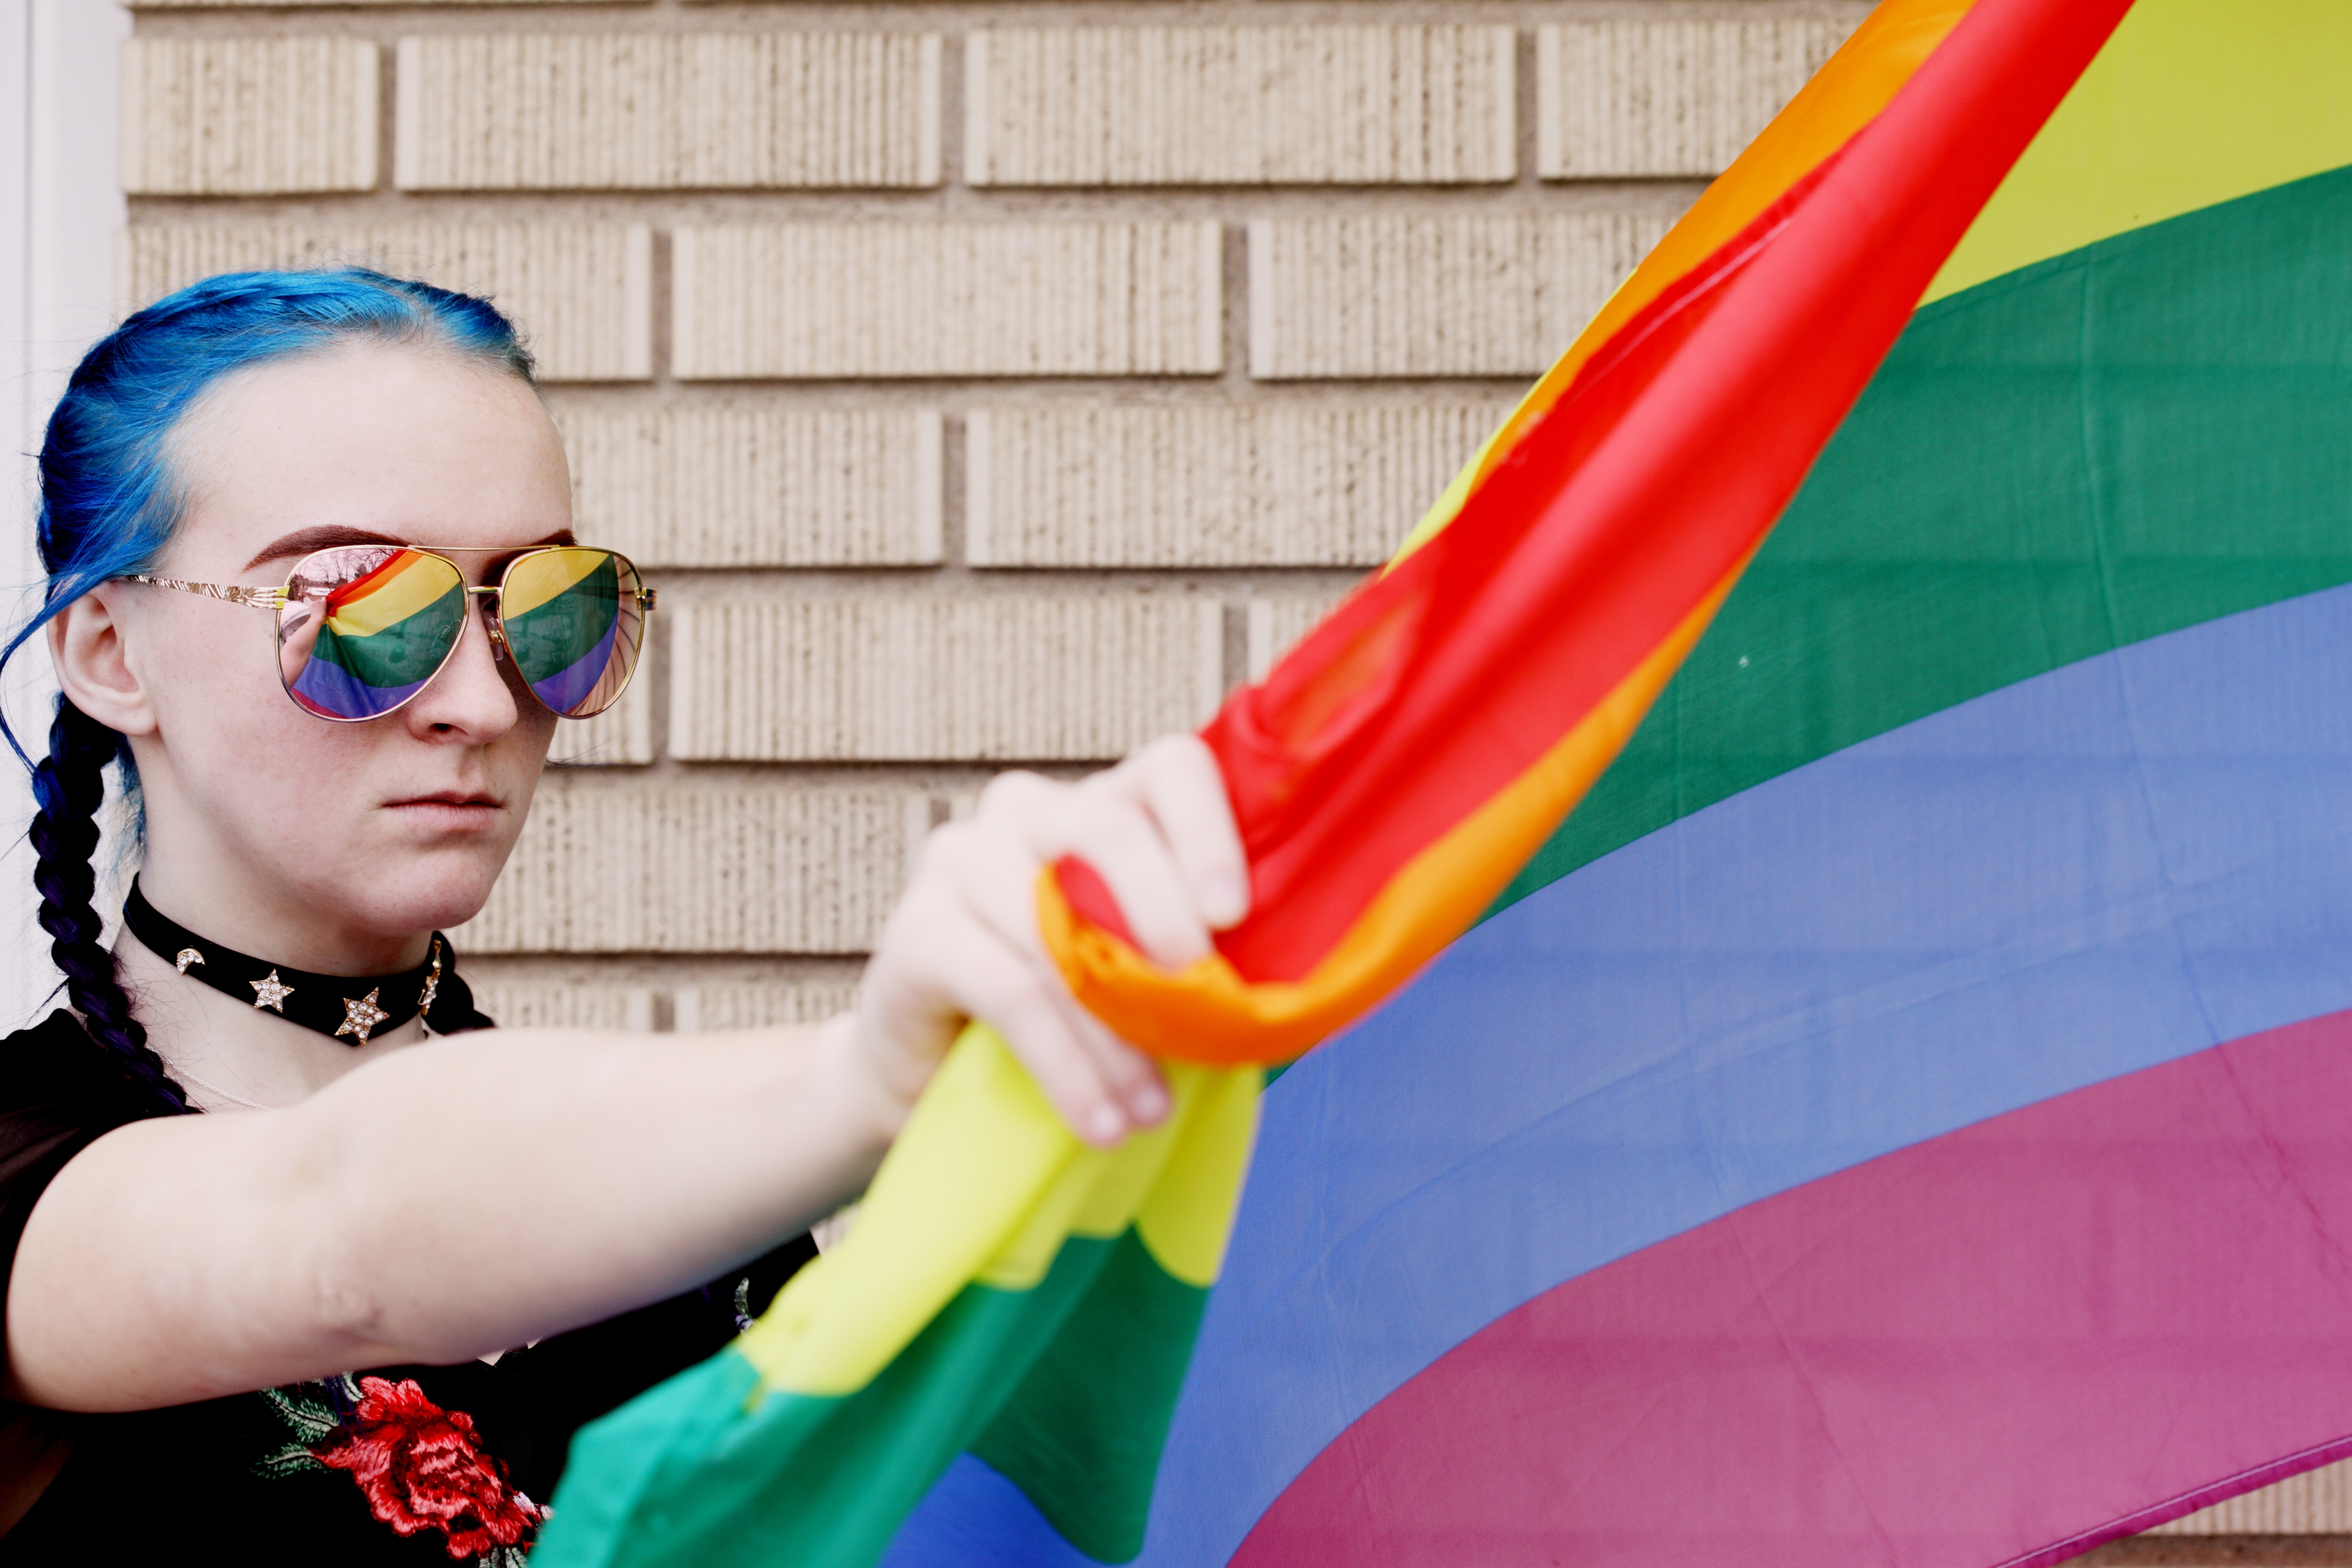 Student with blue hair in reflective silver sunglasses holds a gay pride flag.